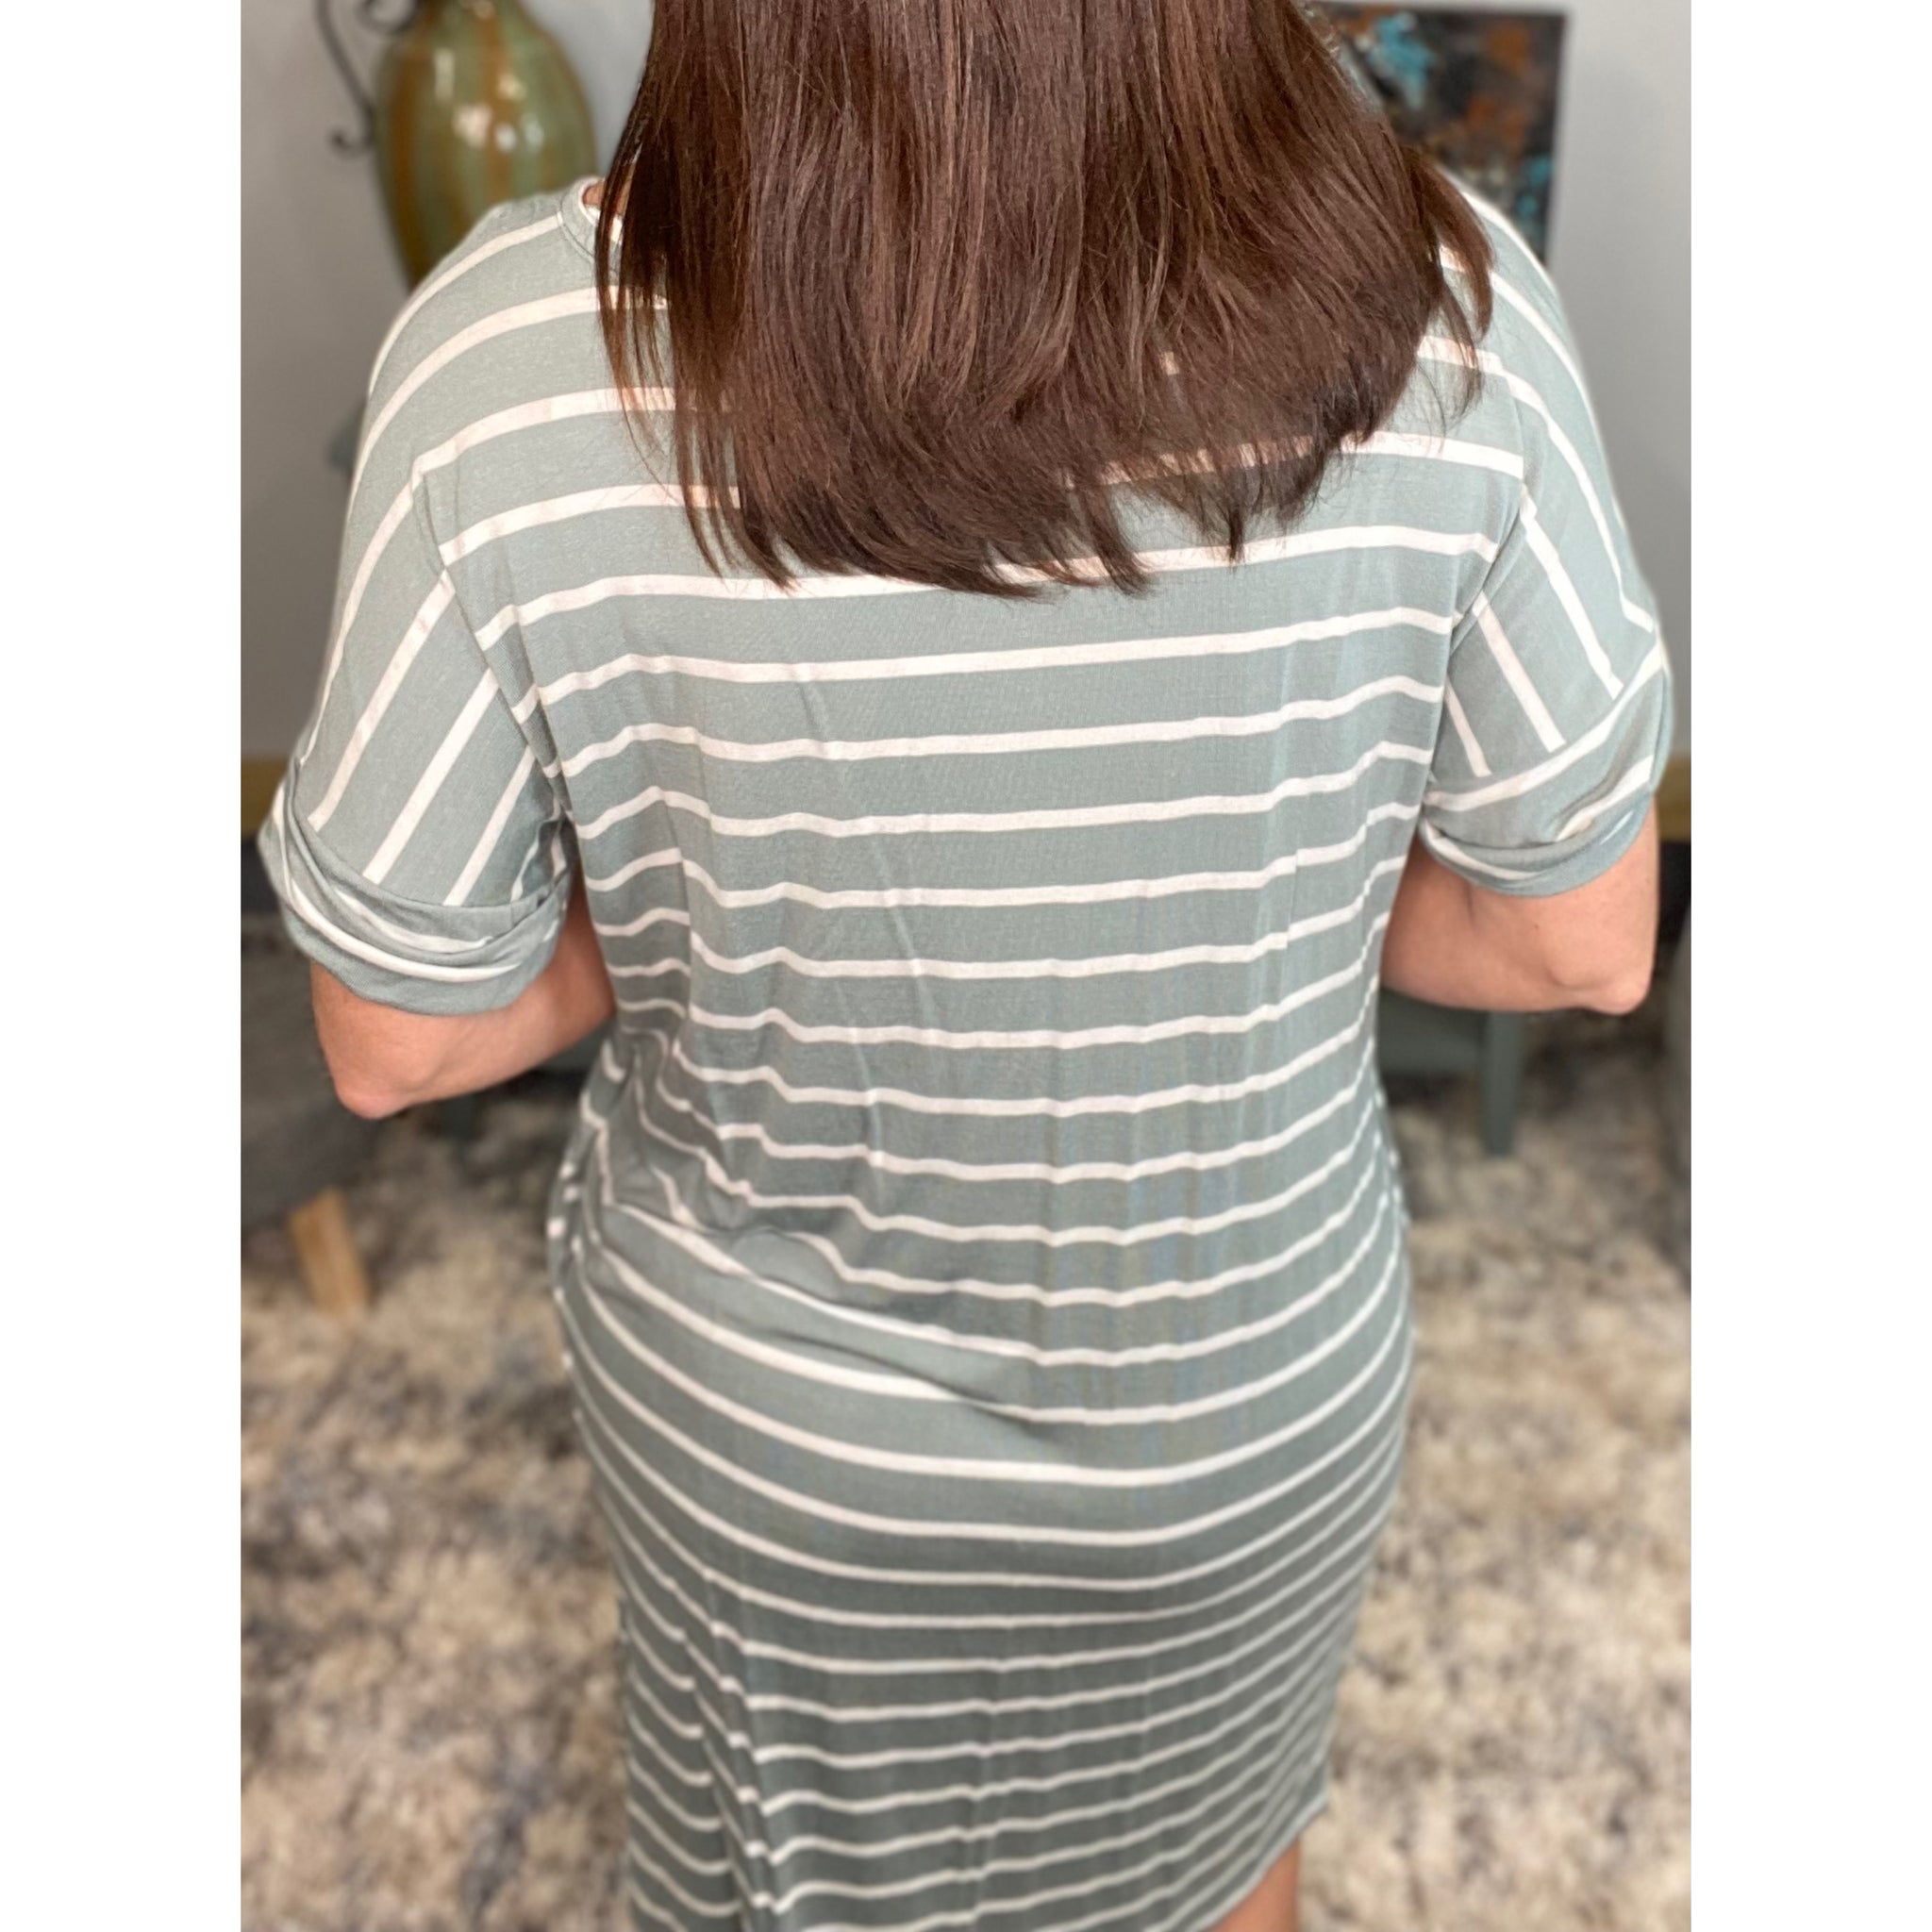 "Think Out The Box" Boxy V-Neck Striped Rolled Cuff Sleeve Pocket Summer Tee Shirt Dress Sage Green S/M/L